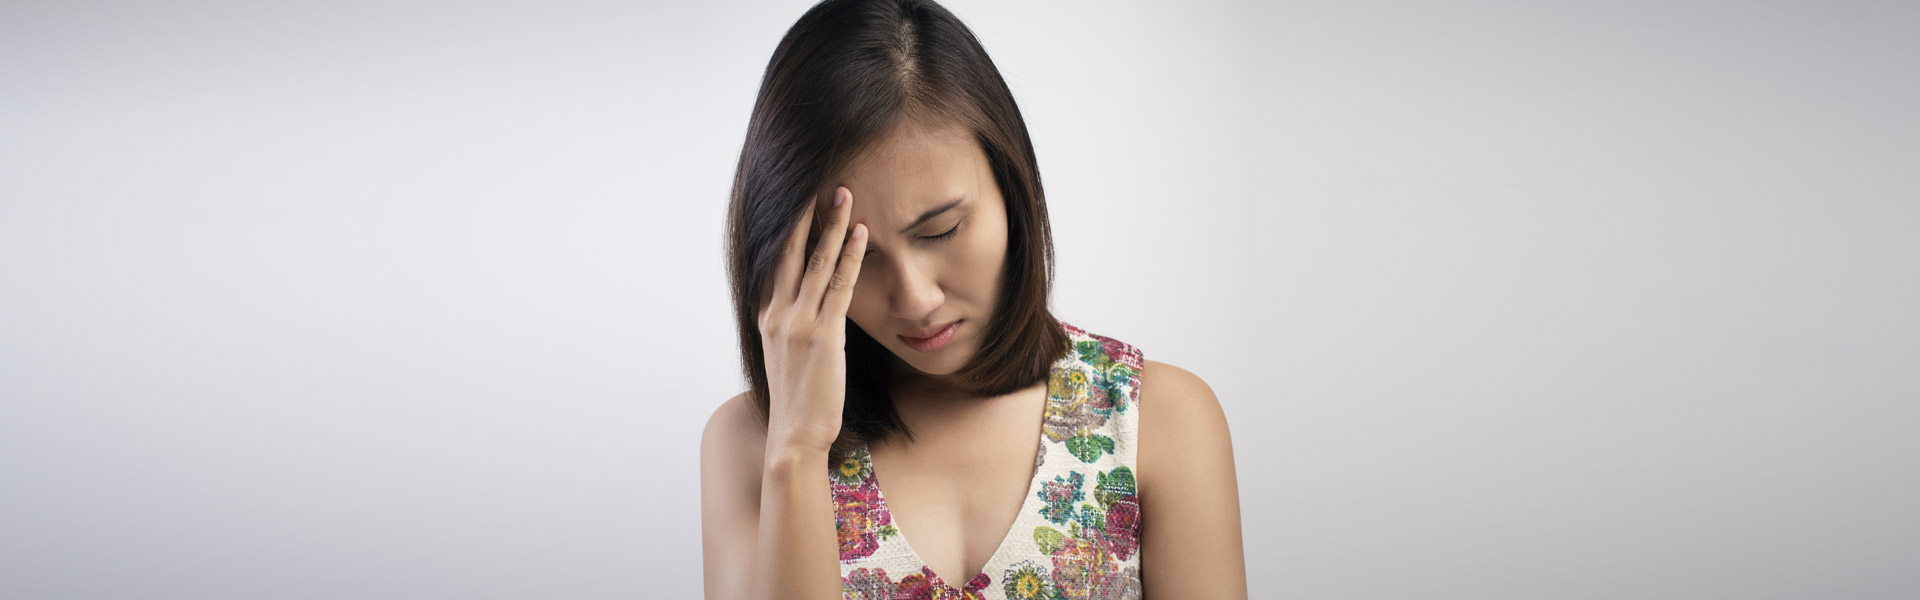 7 Things Not to Say to Migraine Sufferers